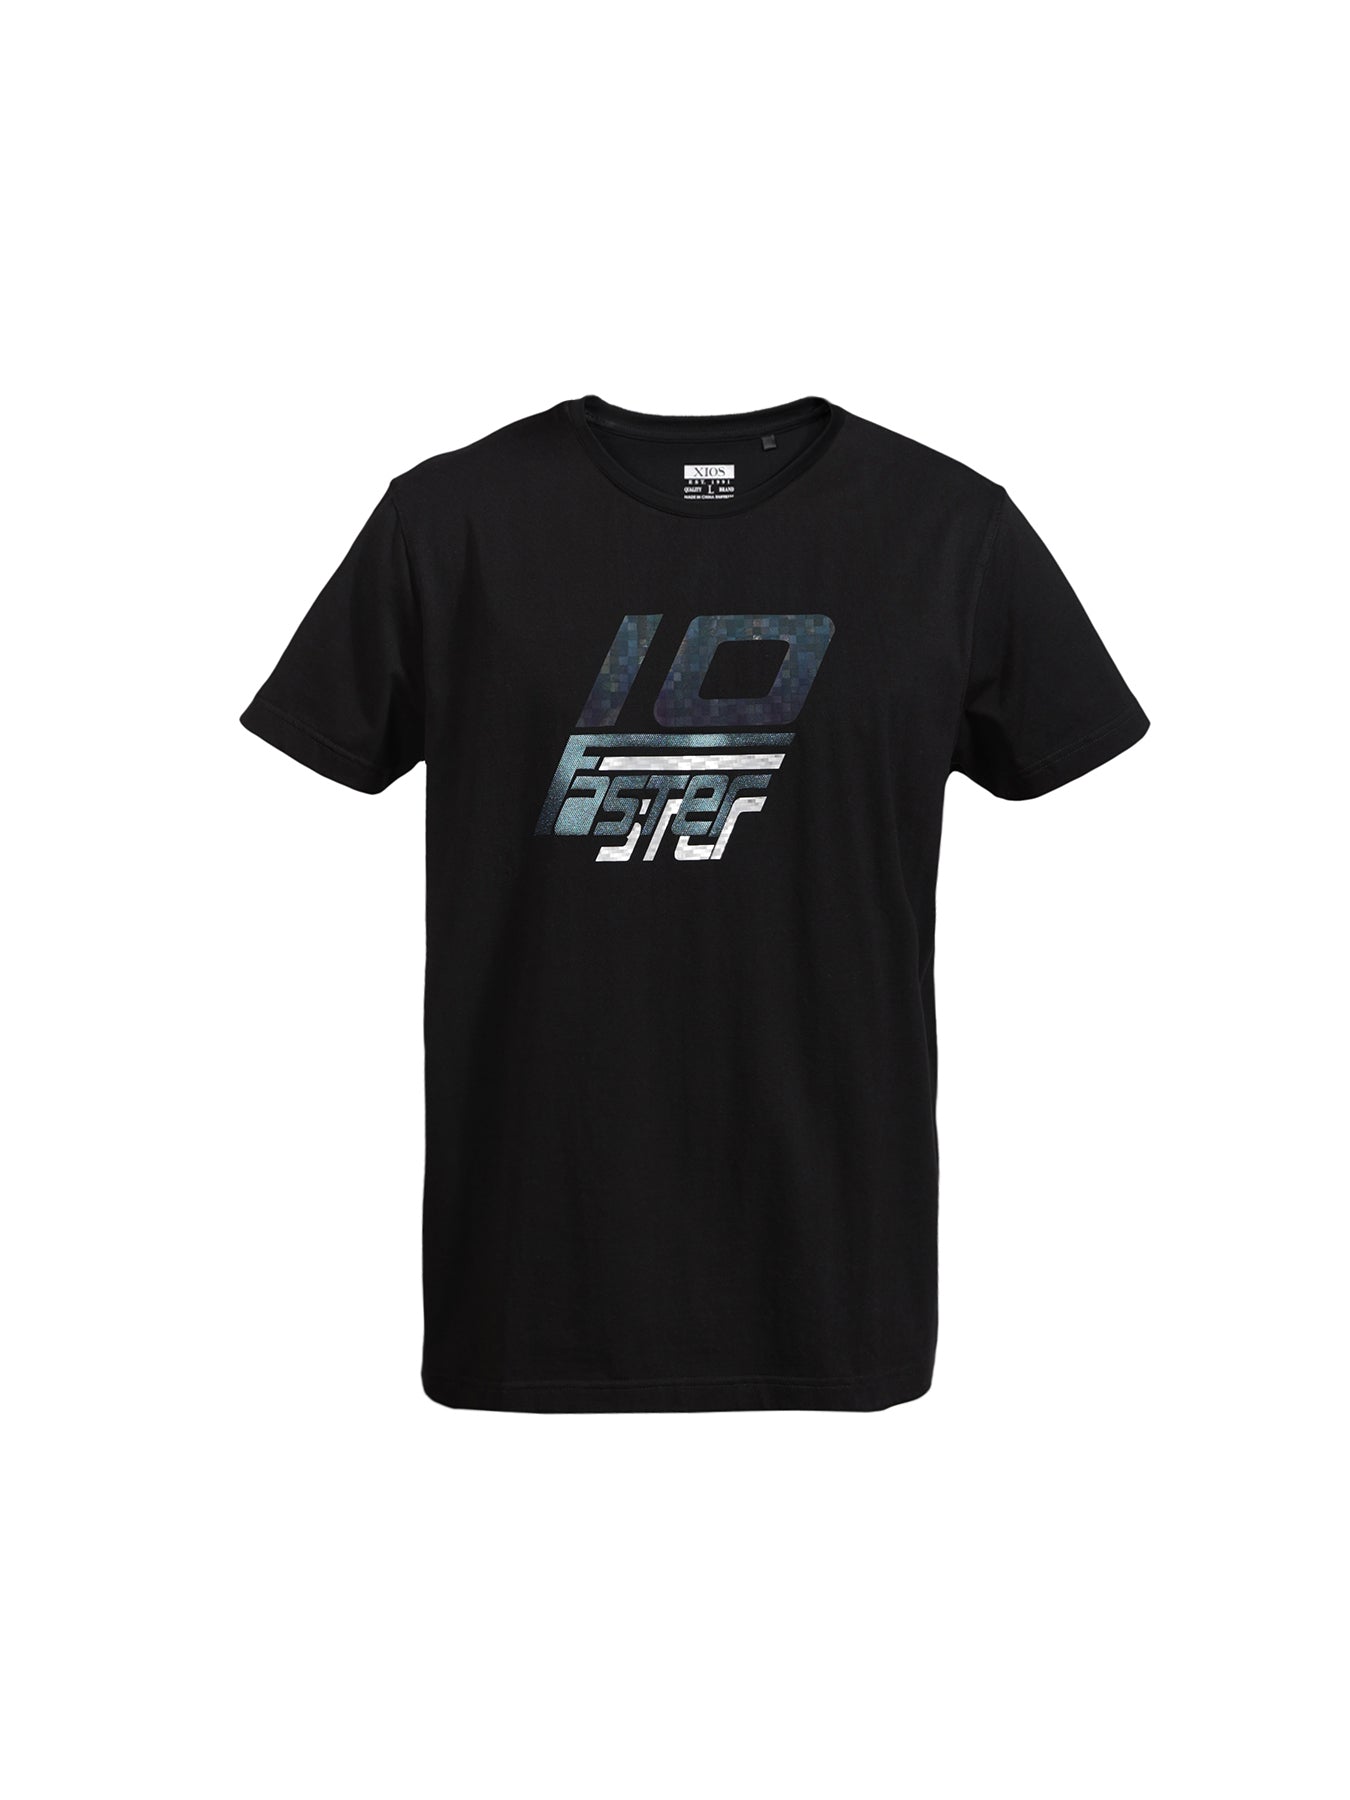 "Faster" Graphic Tee